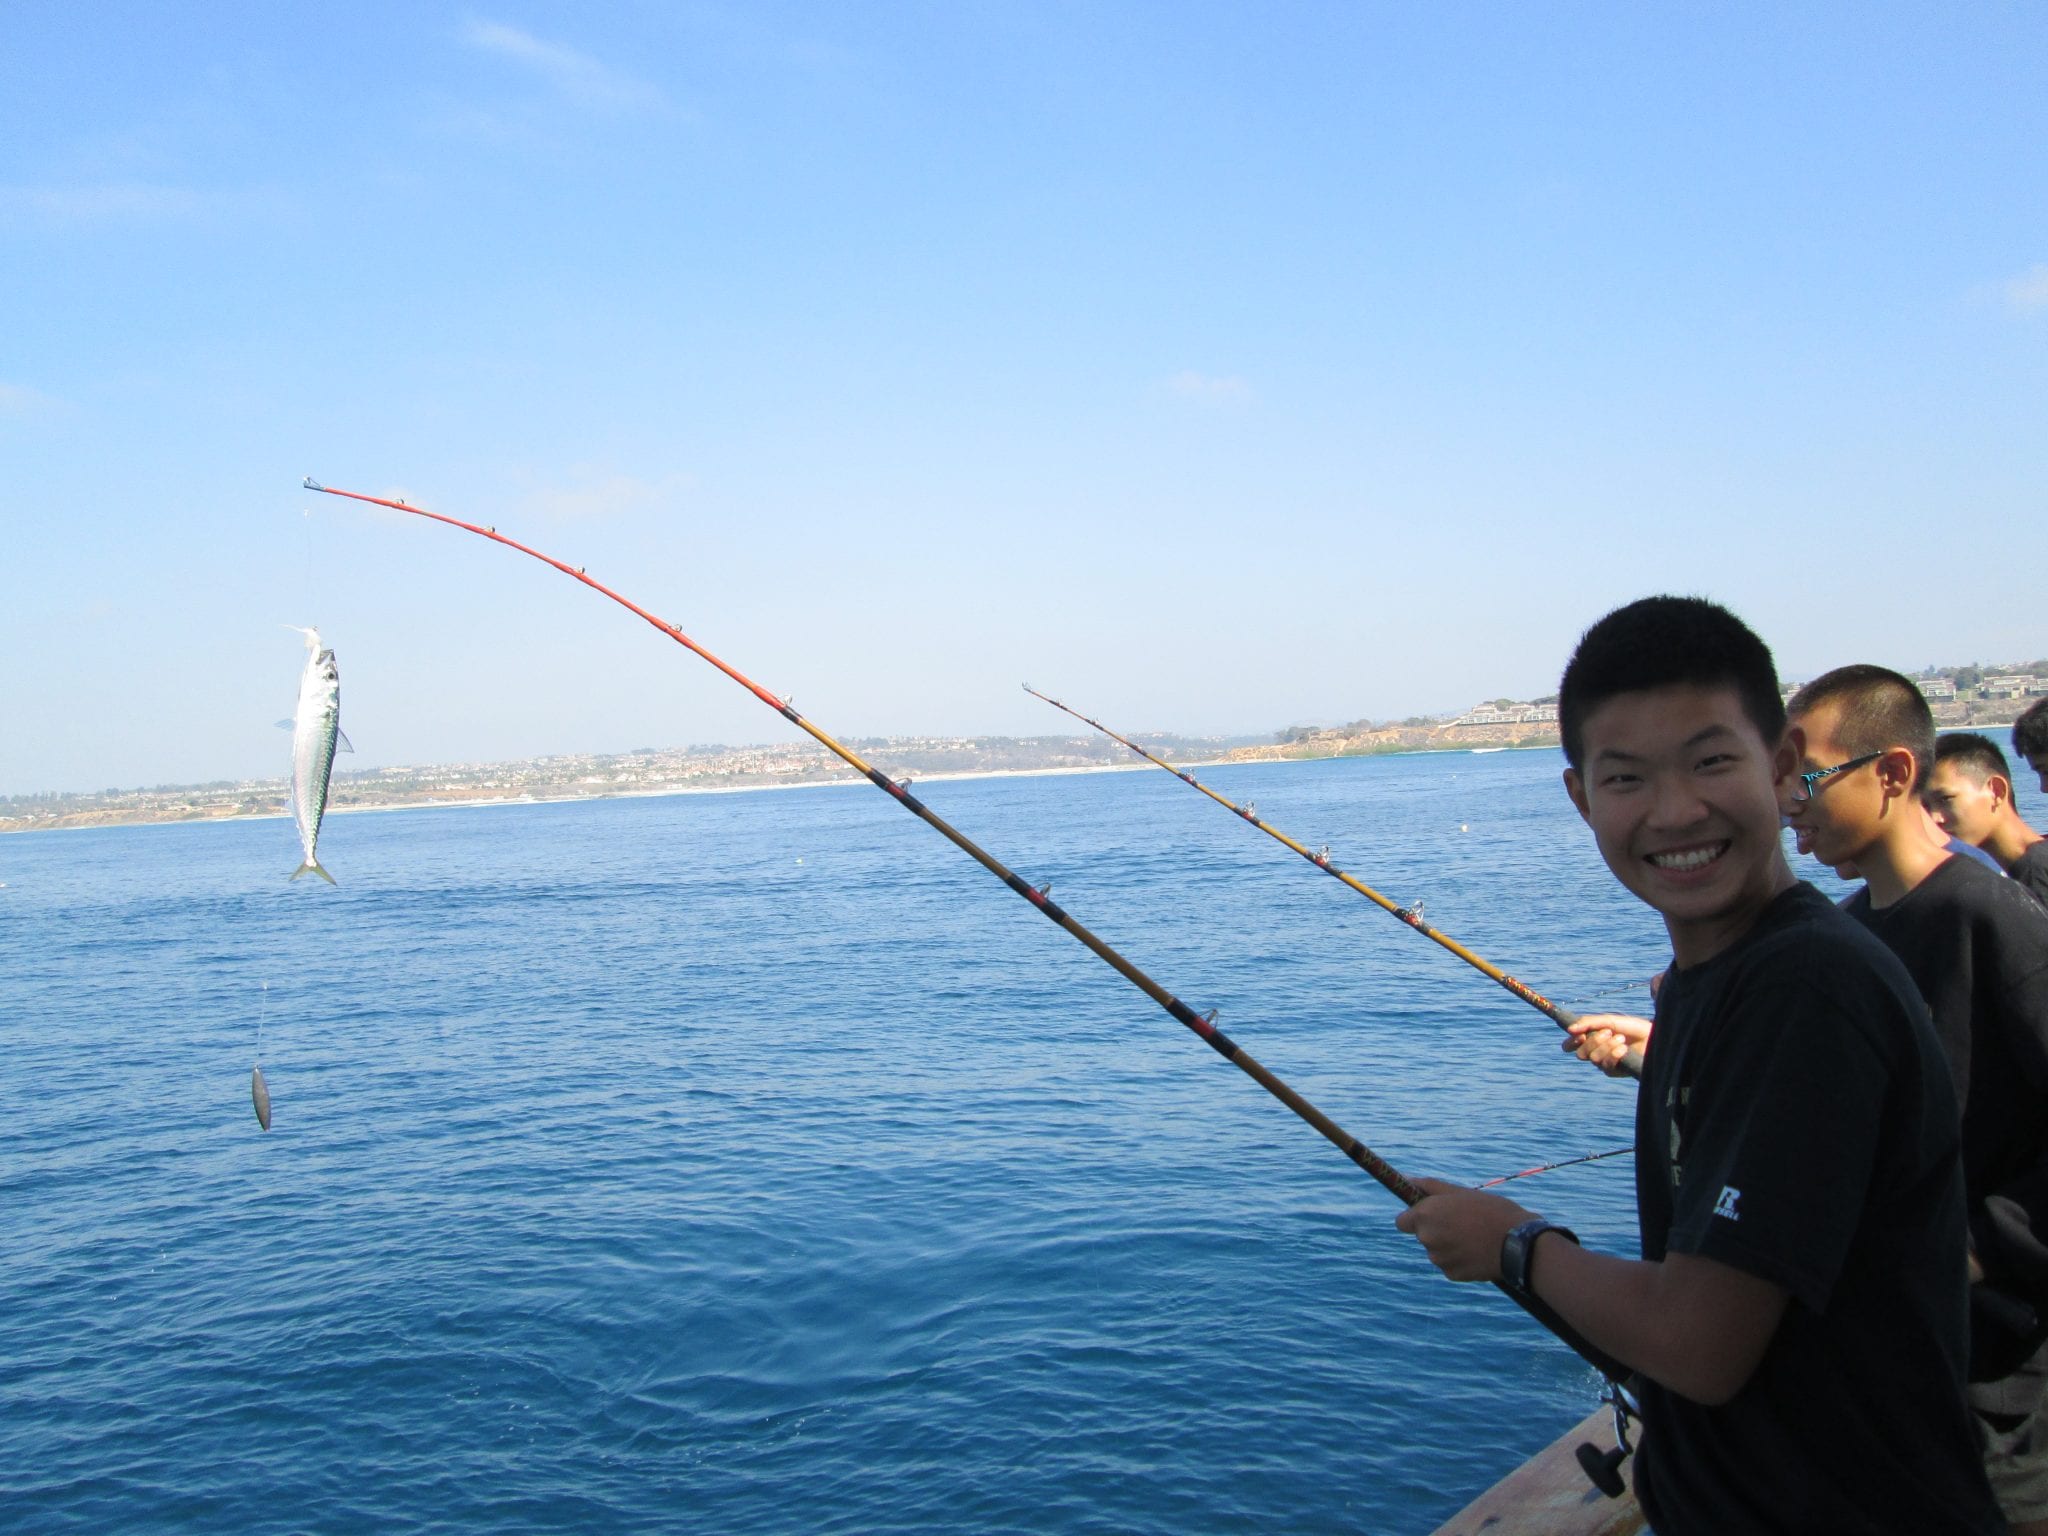 Weekend Activities at boys boarding school - fishing excursions